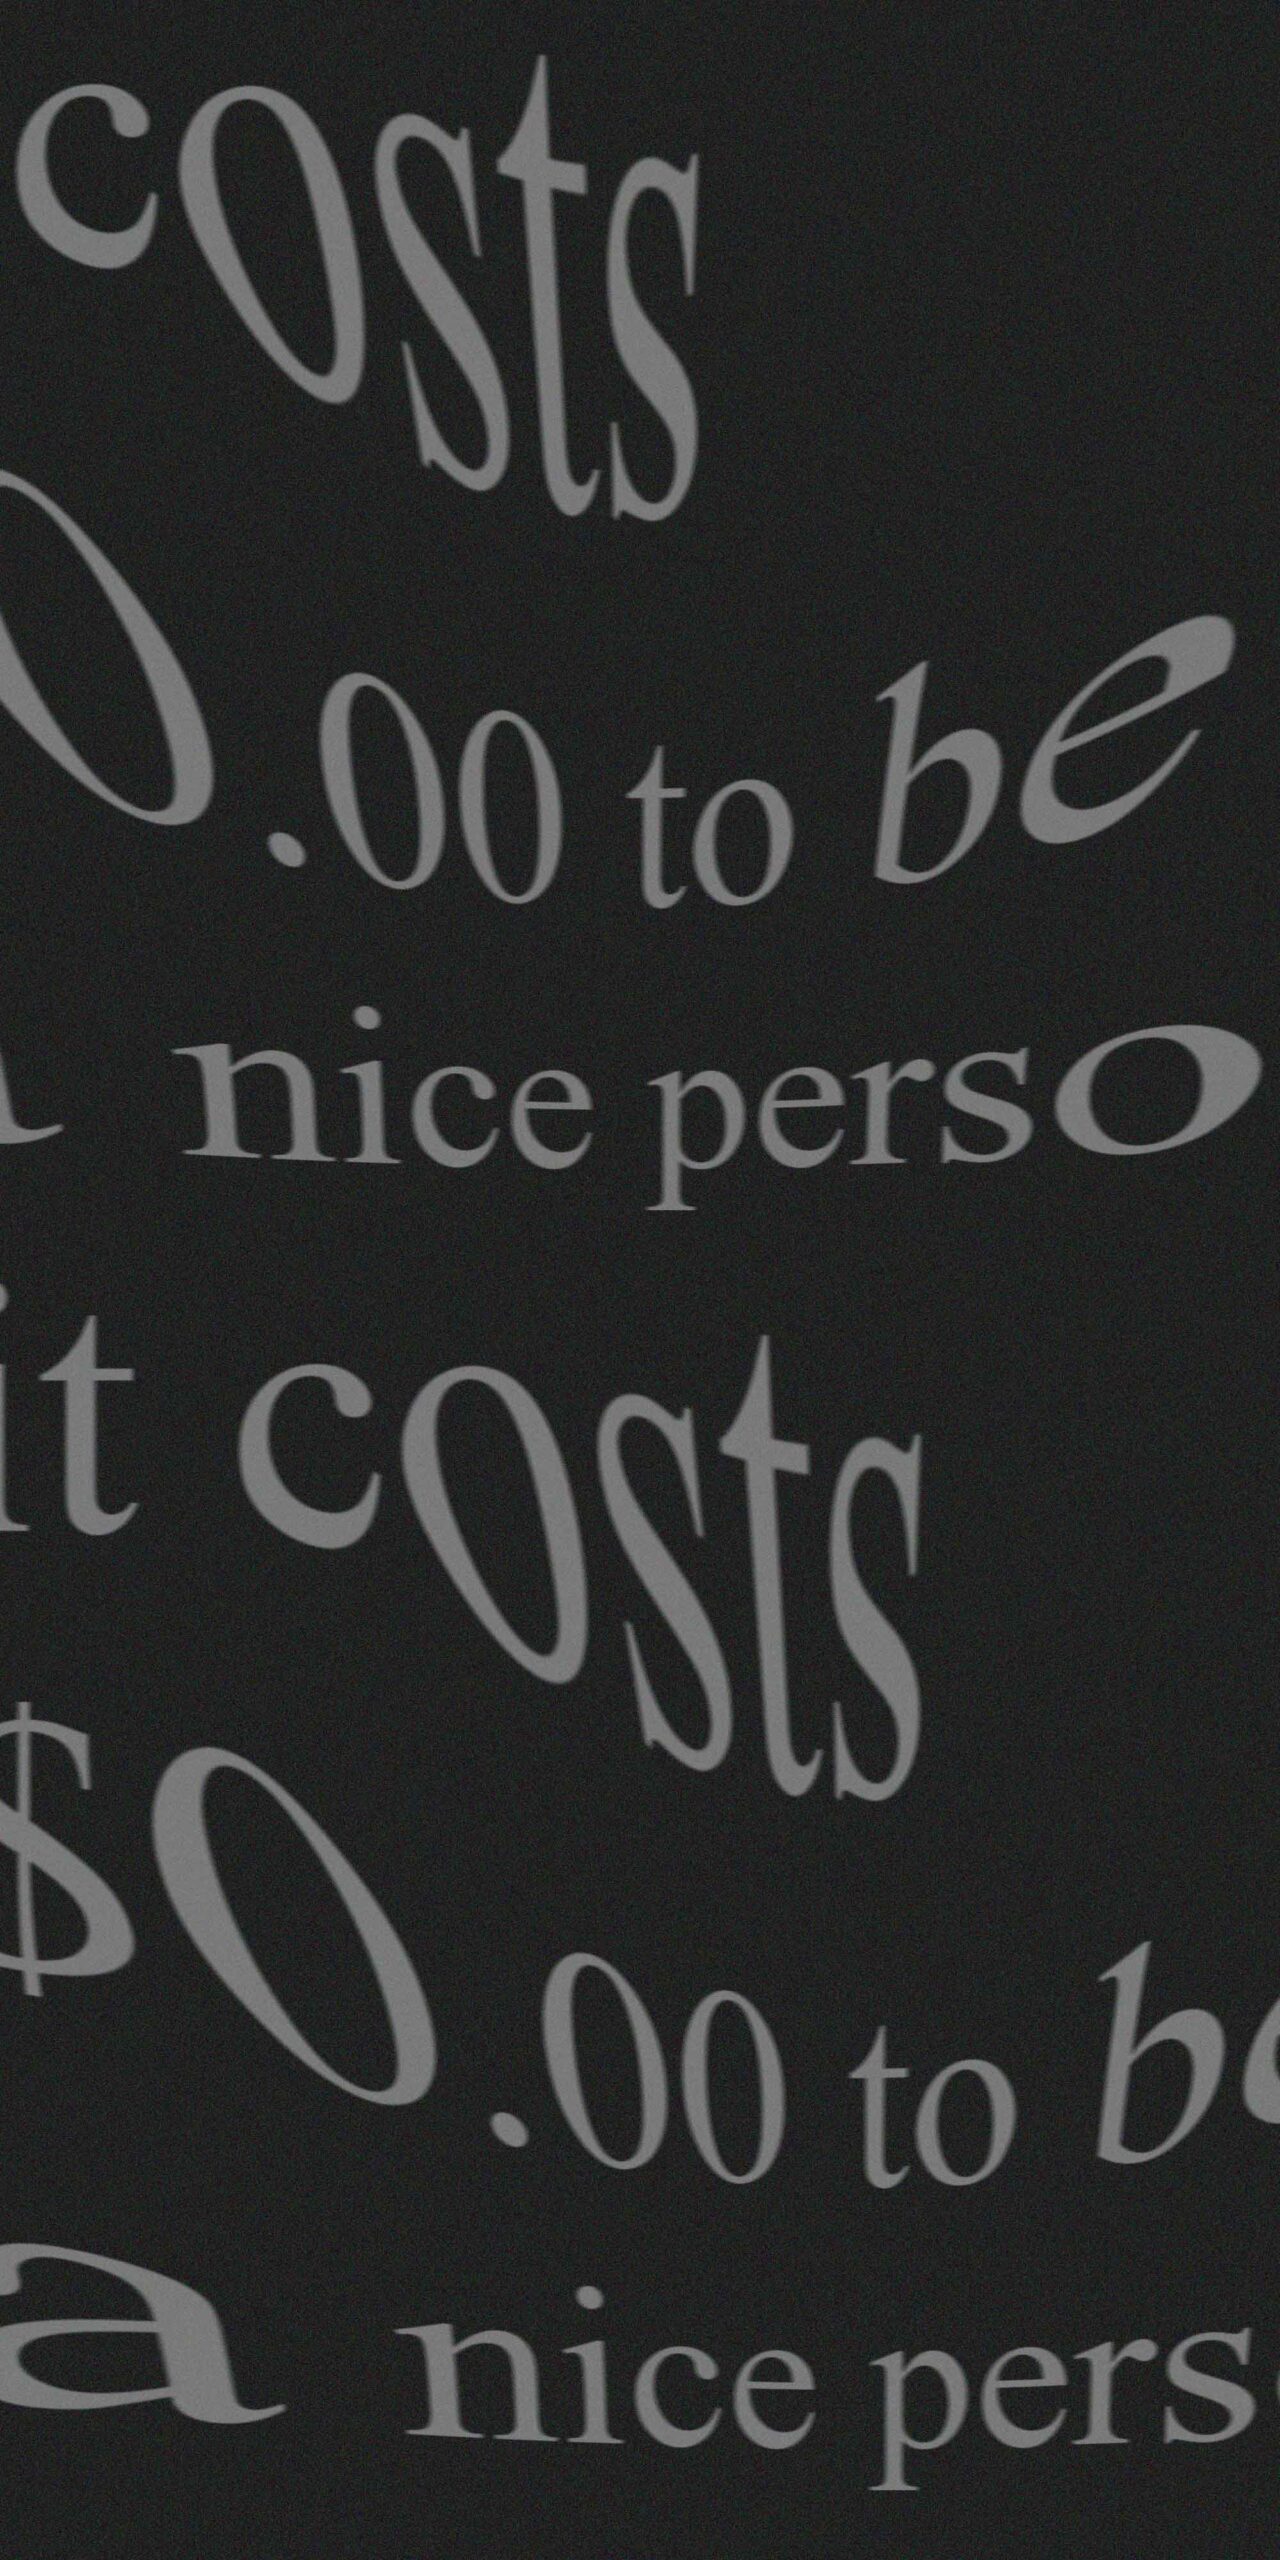 it costs 0 to be nice person dark background wallpaper